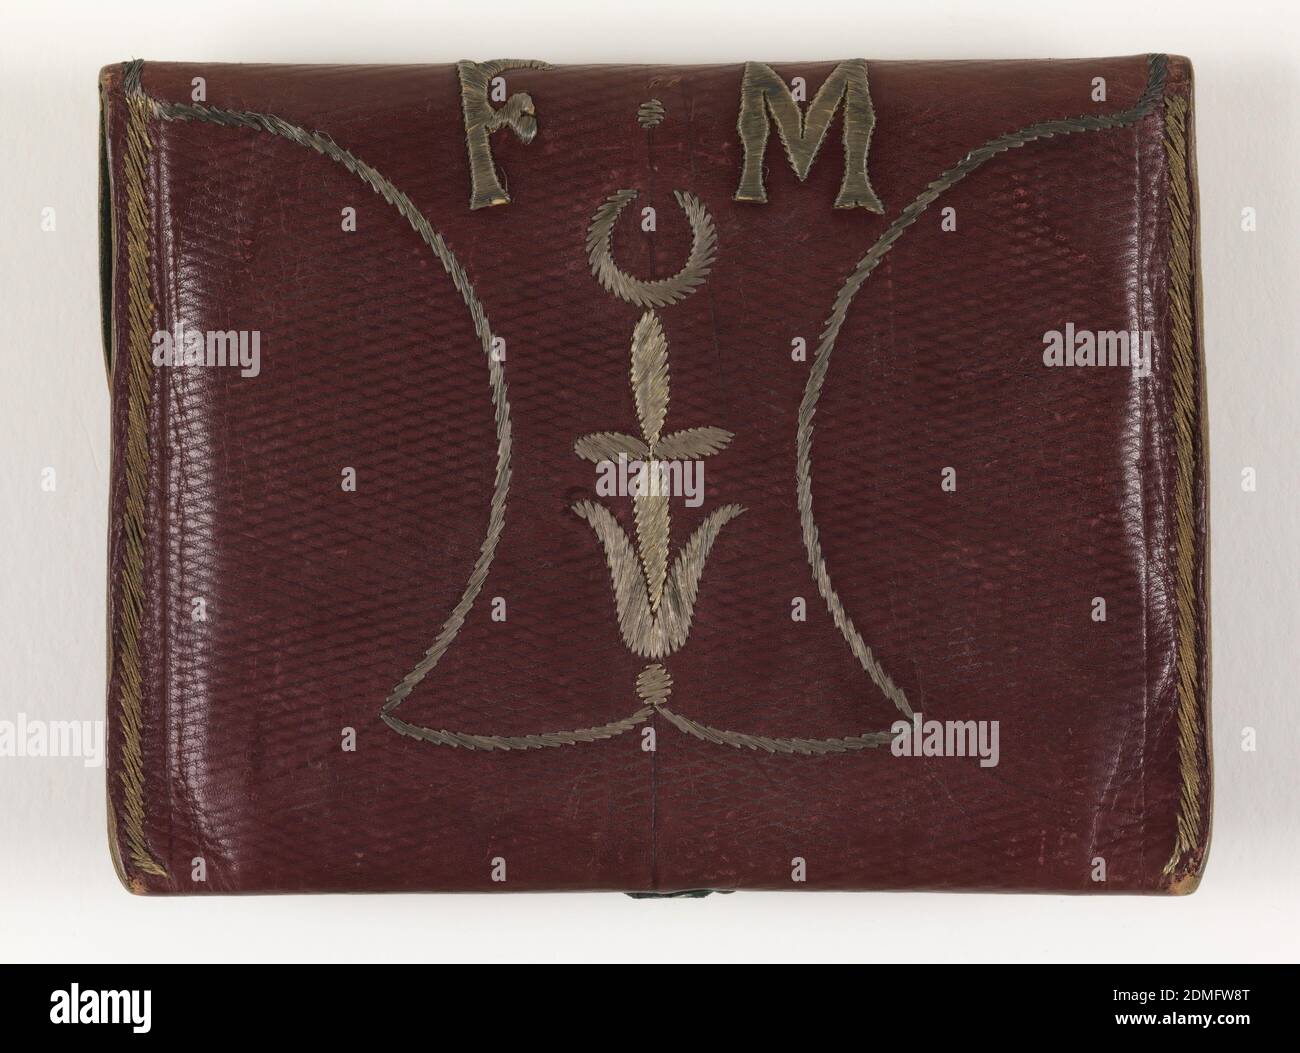 The louis vuitton initials hi-res stock photography and images - Alamy